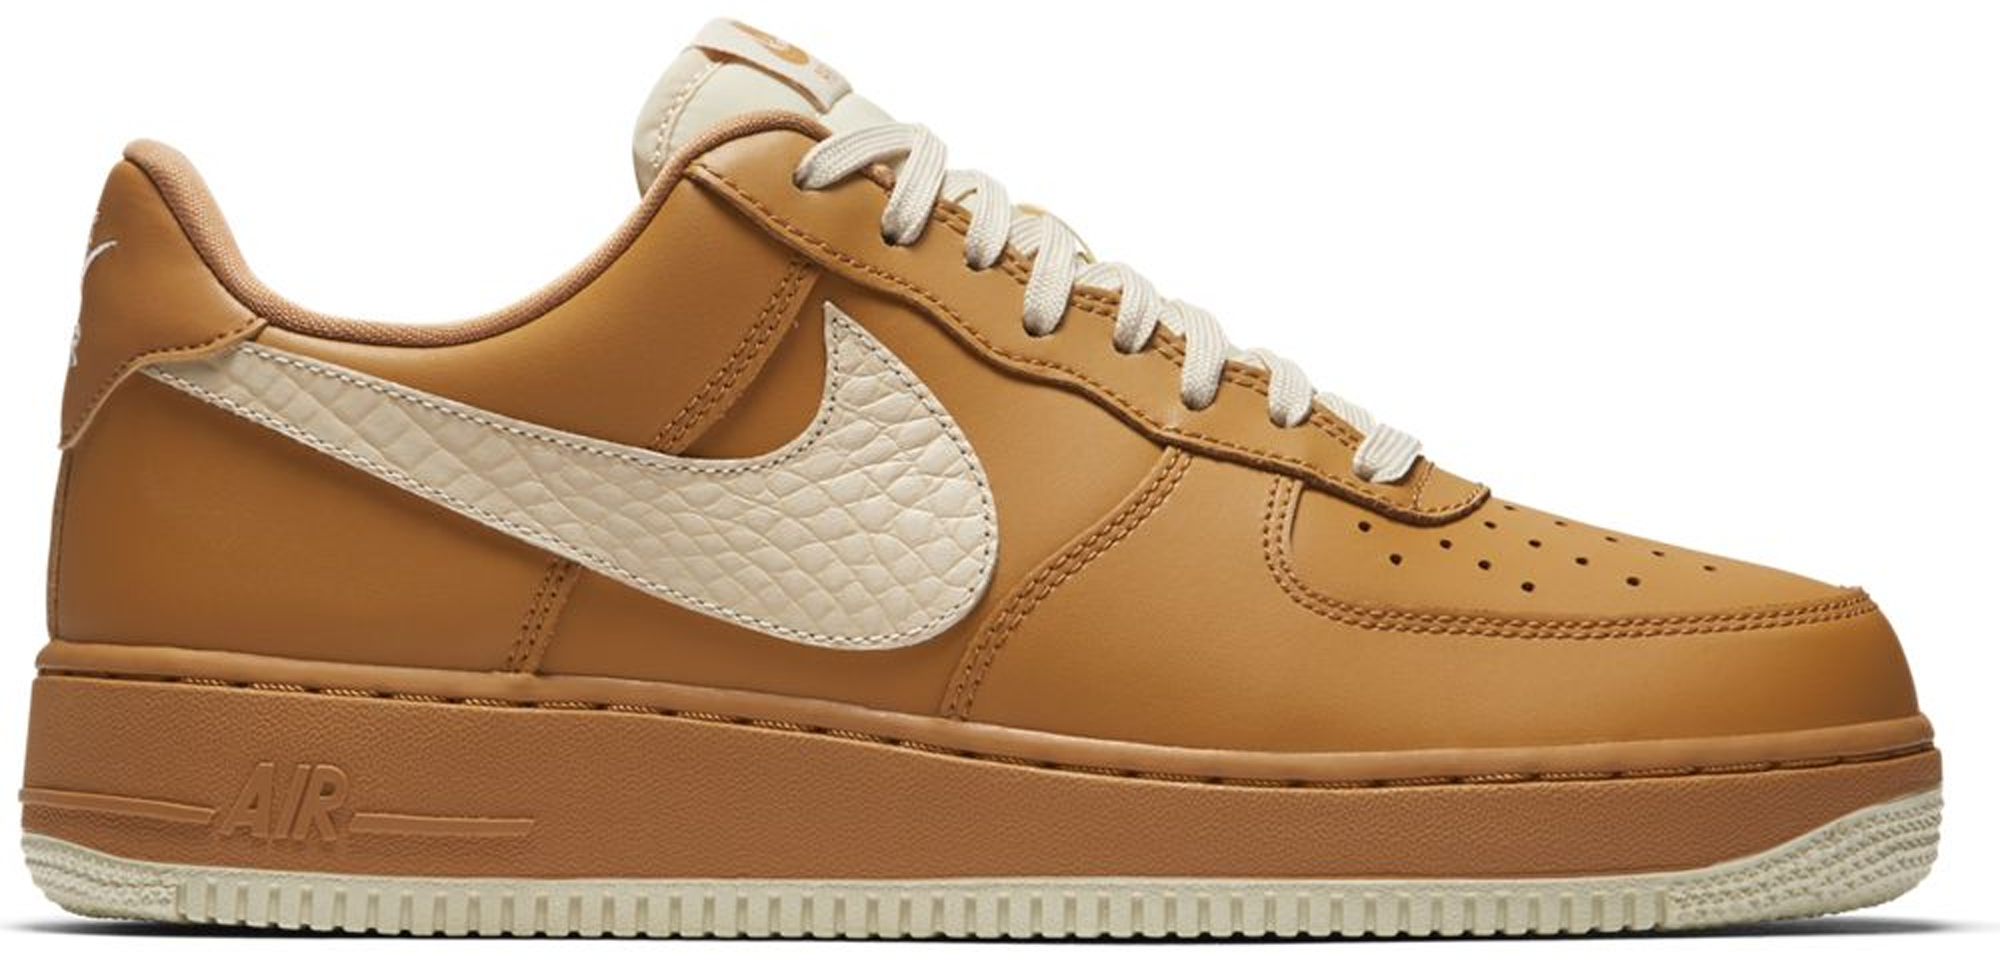 Nike Air Force 1 Low Elemental Gold 